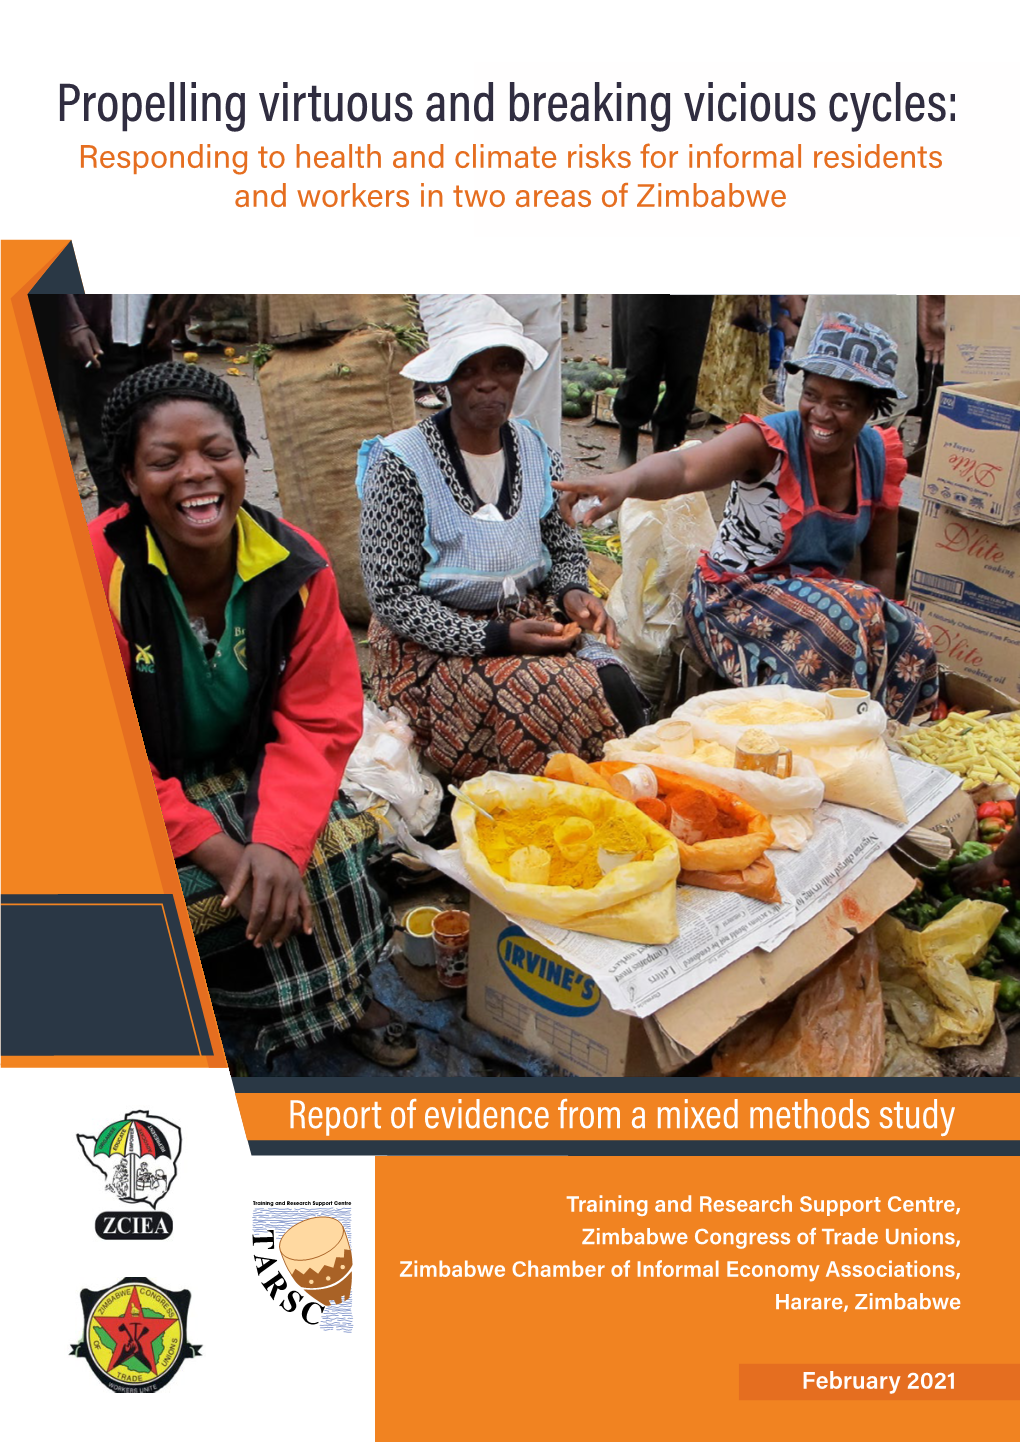 Propelling Virtuous and Breaking Vicious Cycles: Responding to Health and Climate Risks for Informal Residents and Workers in Two Areas of Zimbabwe